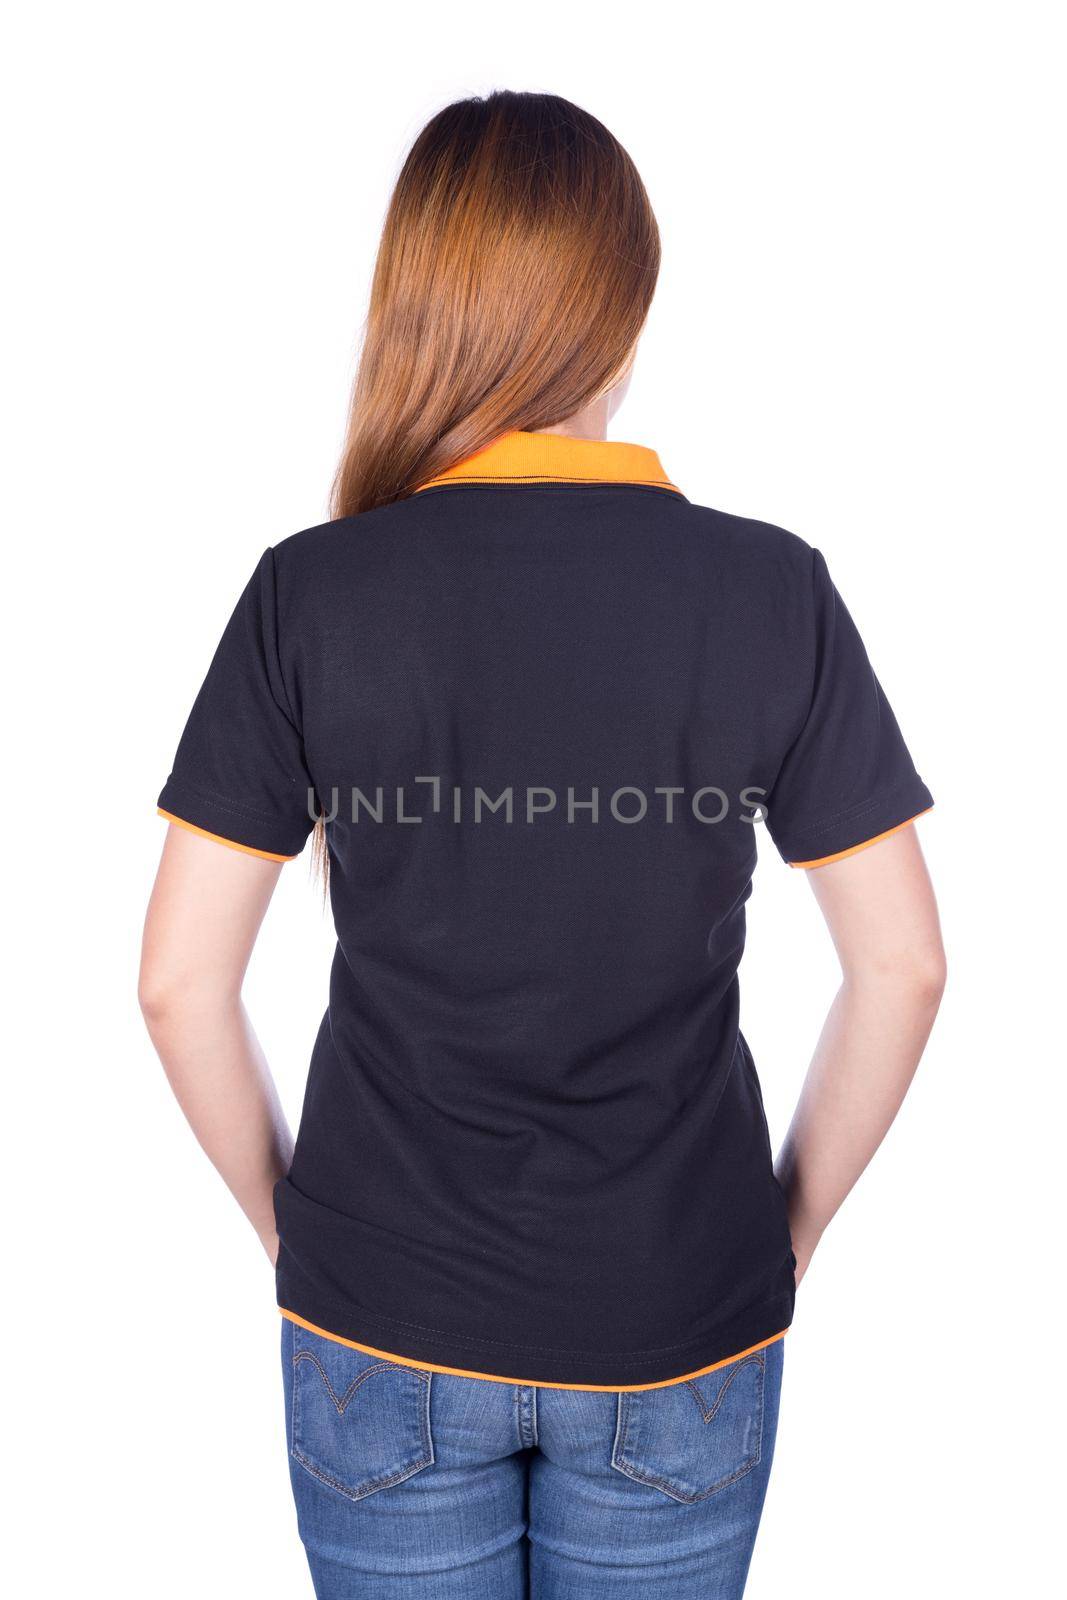 woman in black polo shirt isolated on a white background (back side)